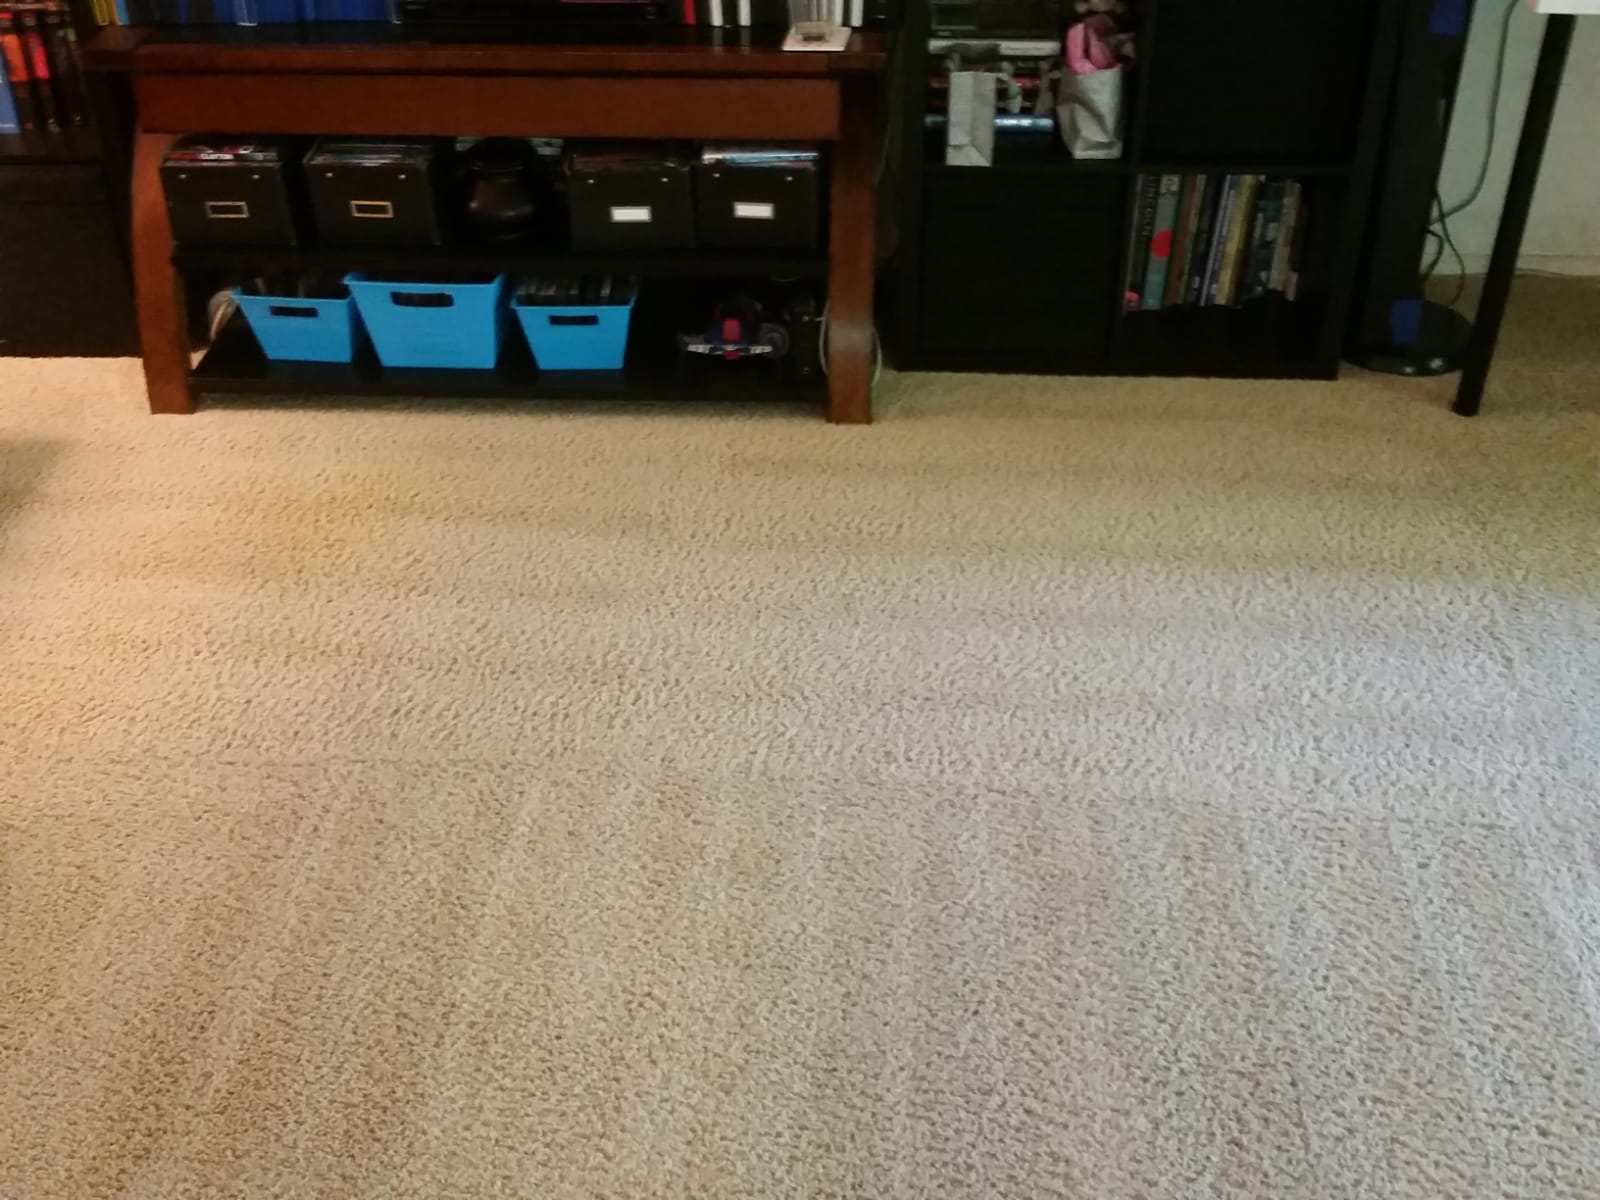 Find Carpet Cleaning Near Me - Carpet Clean Adelaide - The Local Experts